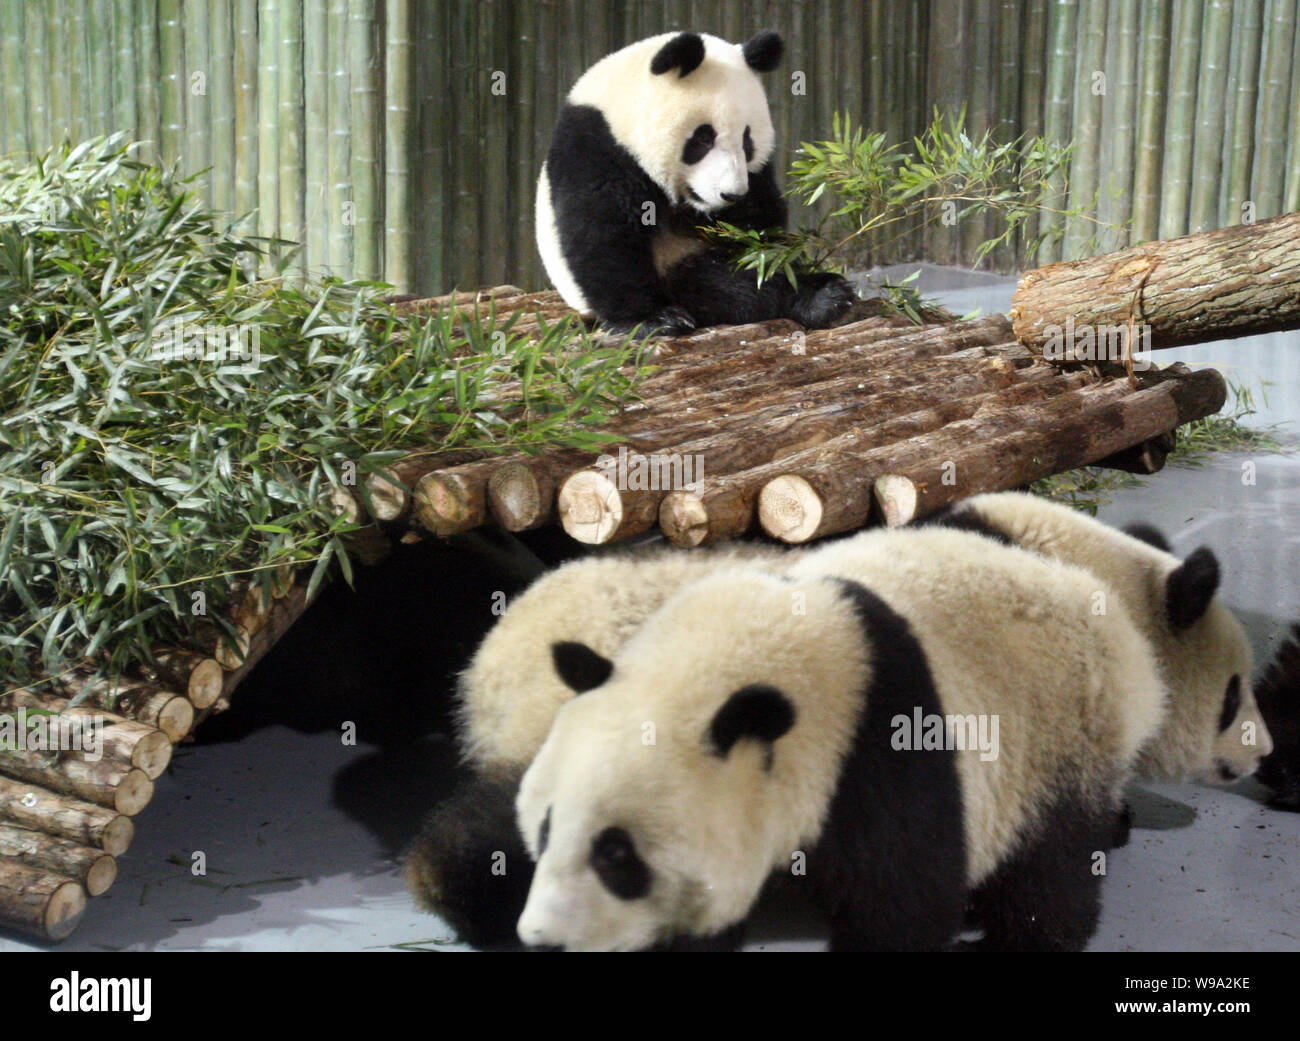 Giant pandas from Bifengxia Base of the Wolong Giant Panda Reserve Center have fun at the Shanghai Zoo in Shanghai, China, Tuesday, January 5, 2010. Stock Photo